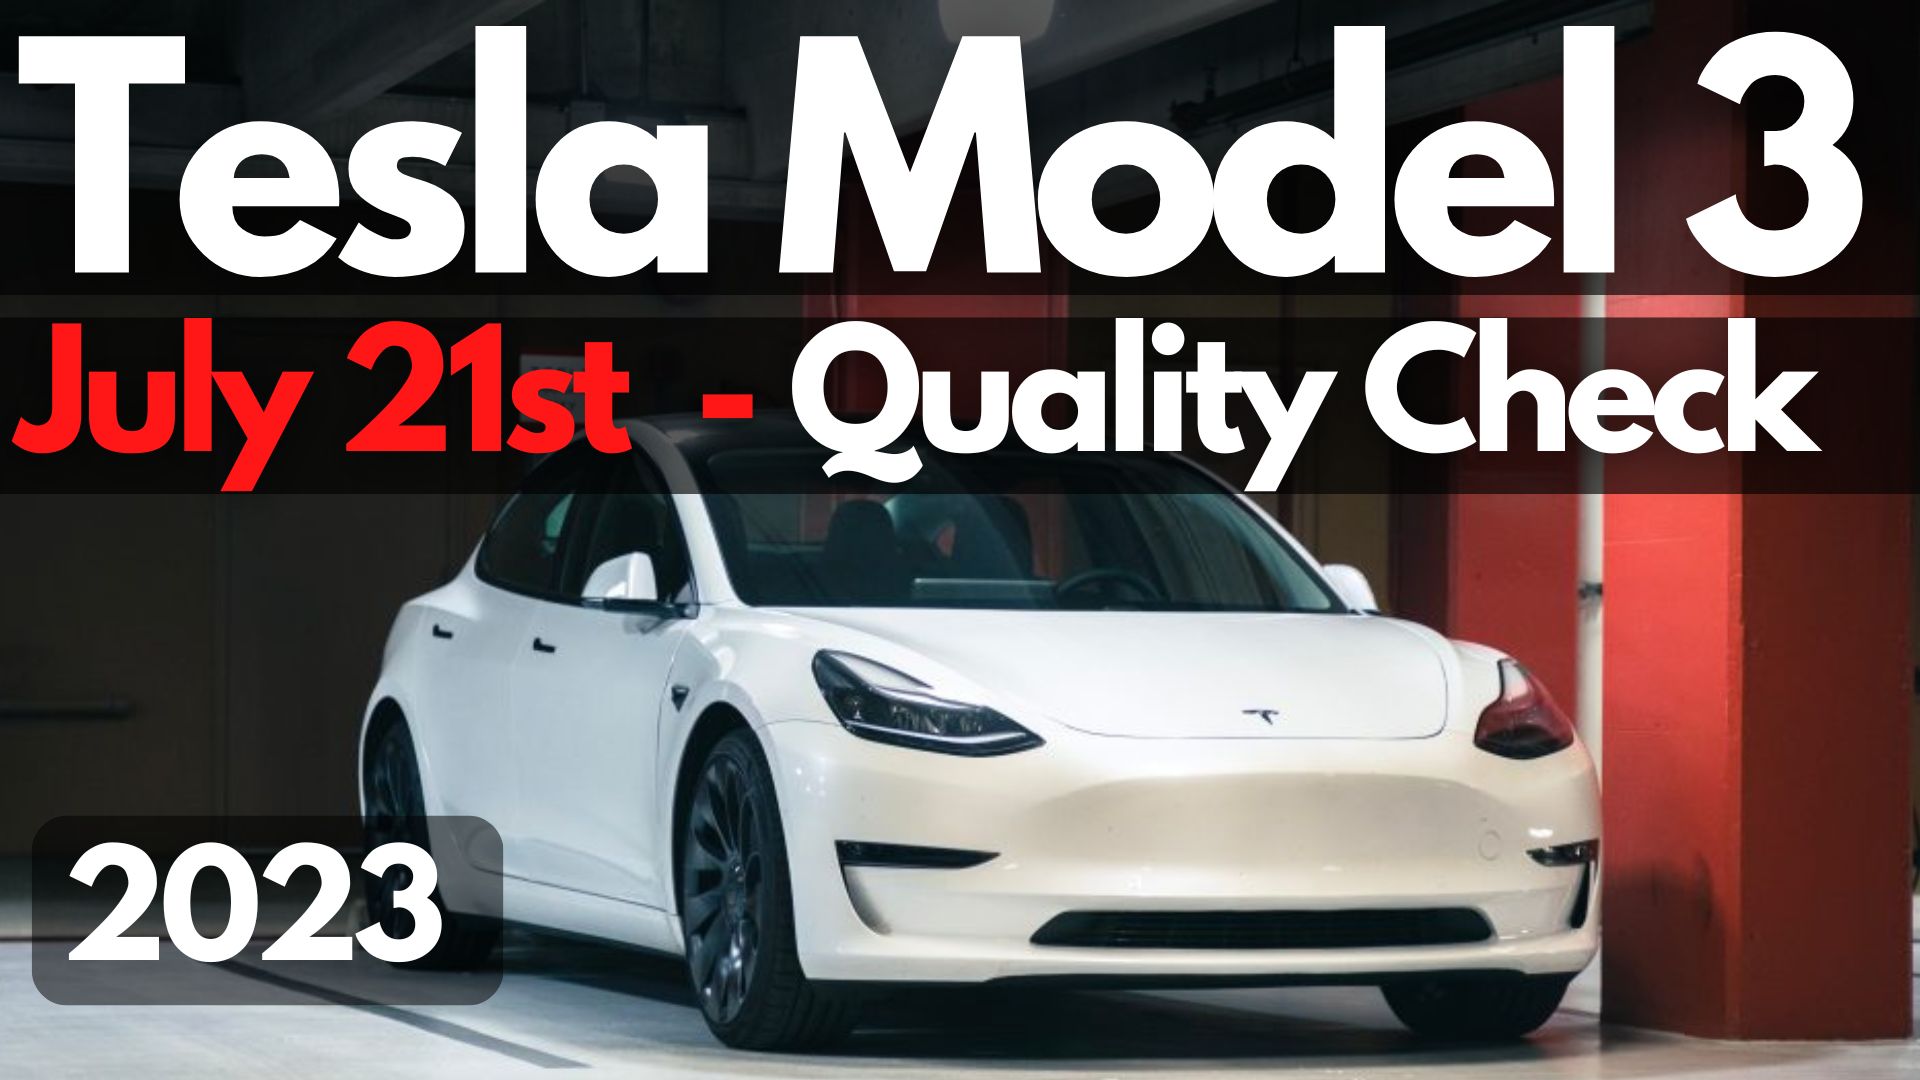 Has Tesla Improved The Model 3 Build Quality For July 21, 2023?